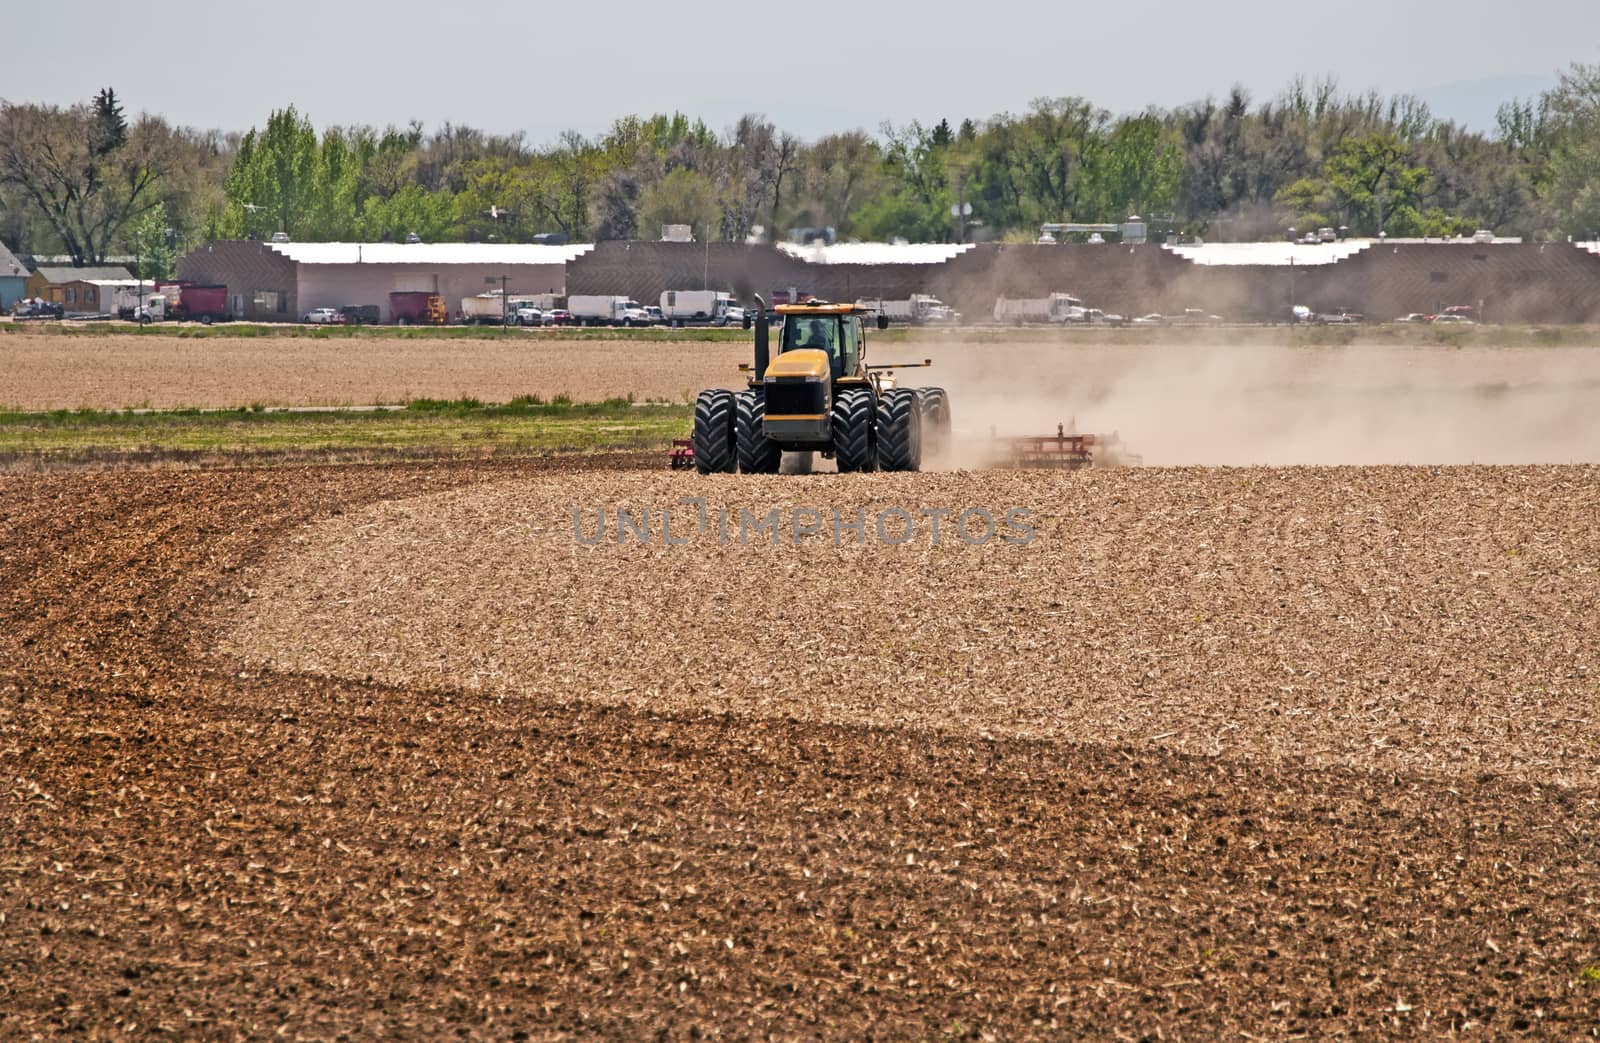 Farmer in a large tractor pulling a disc harrow through his field to break up the soil for spring planting.